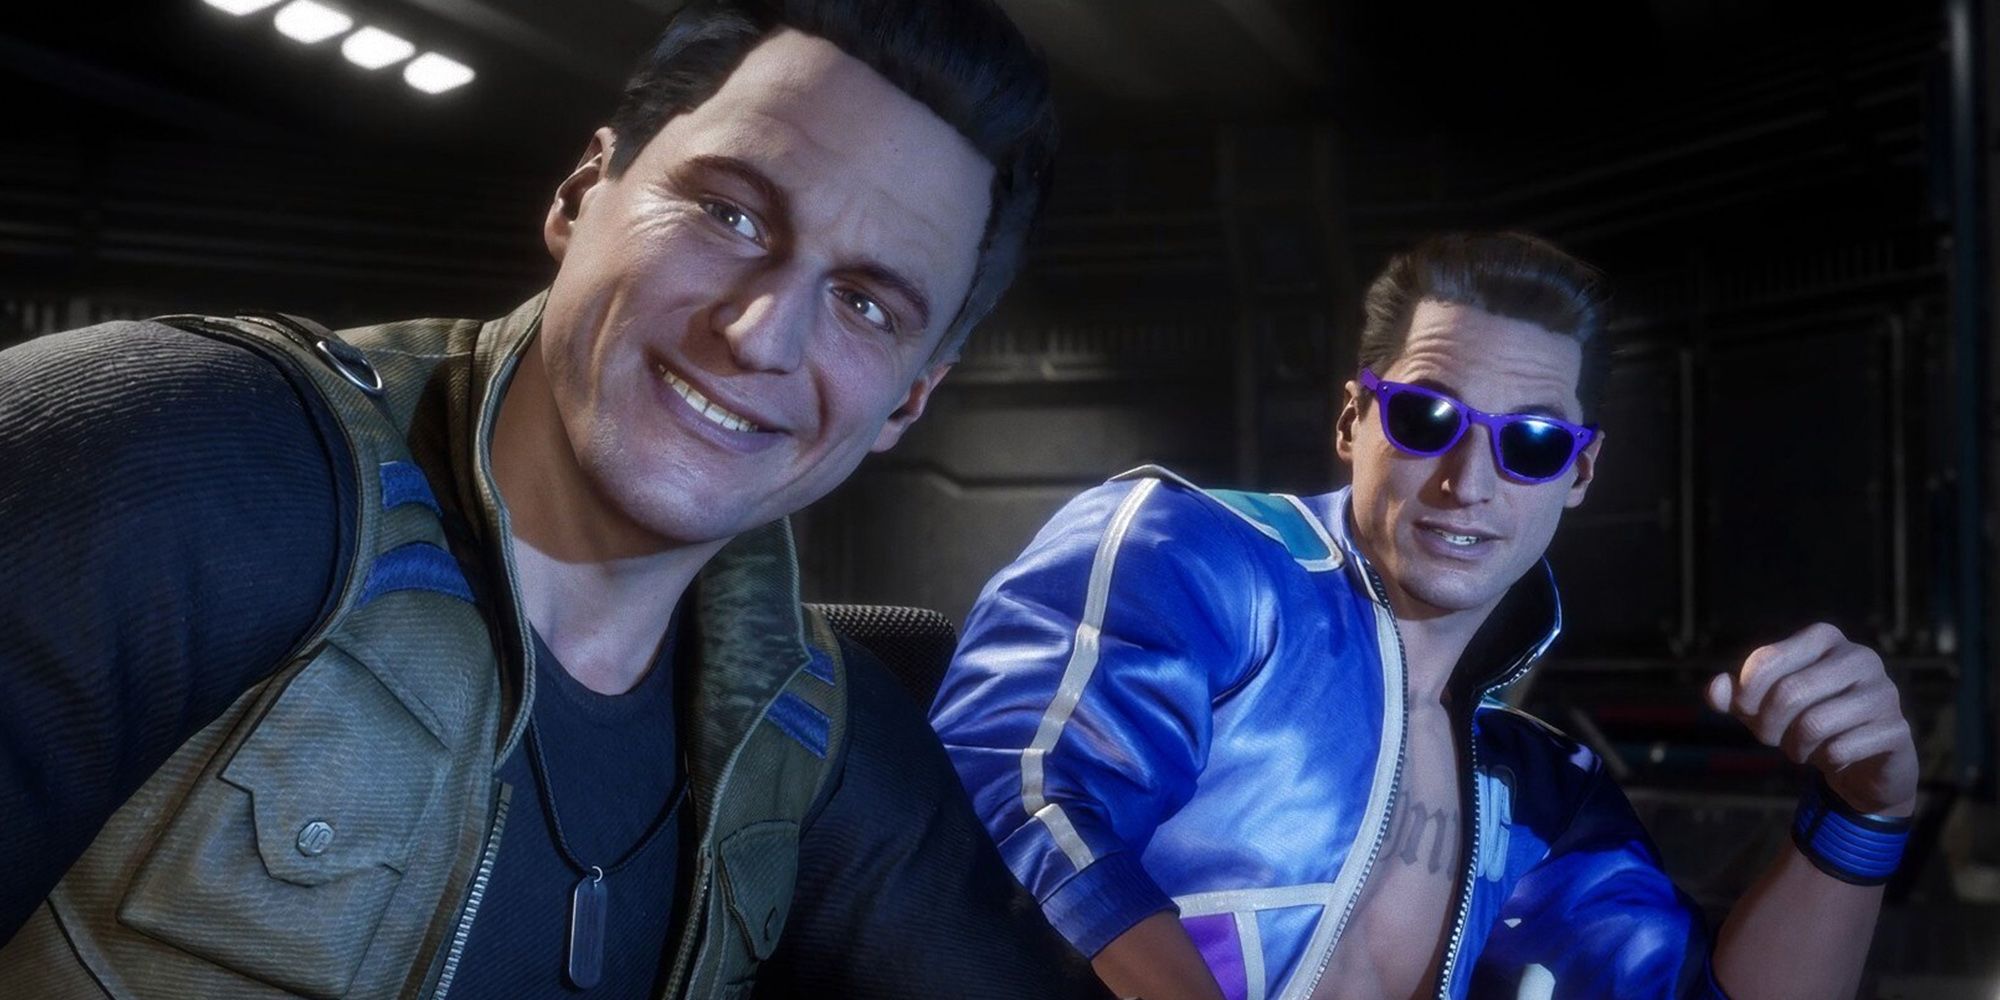 Mortal Kombat - Both The Future And Past Johnny Cage Smiling At Something